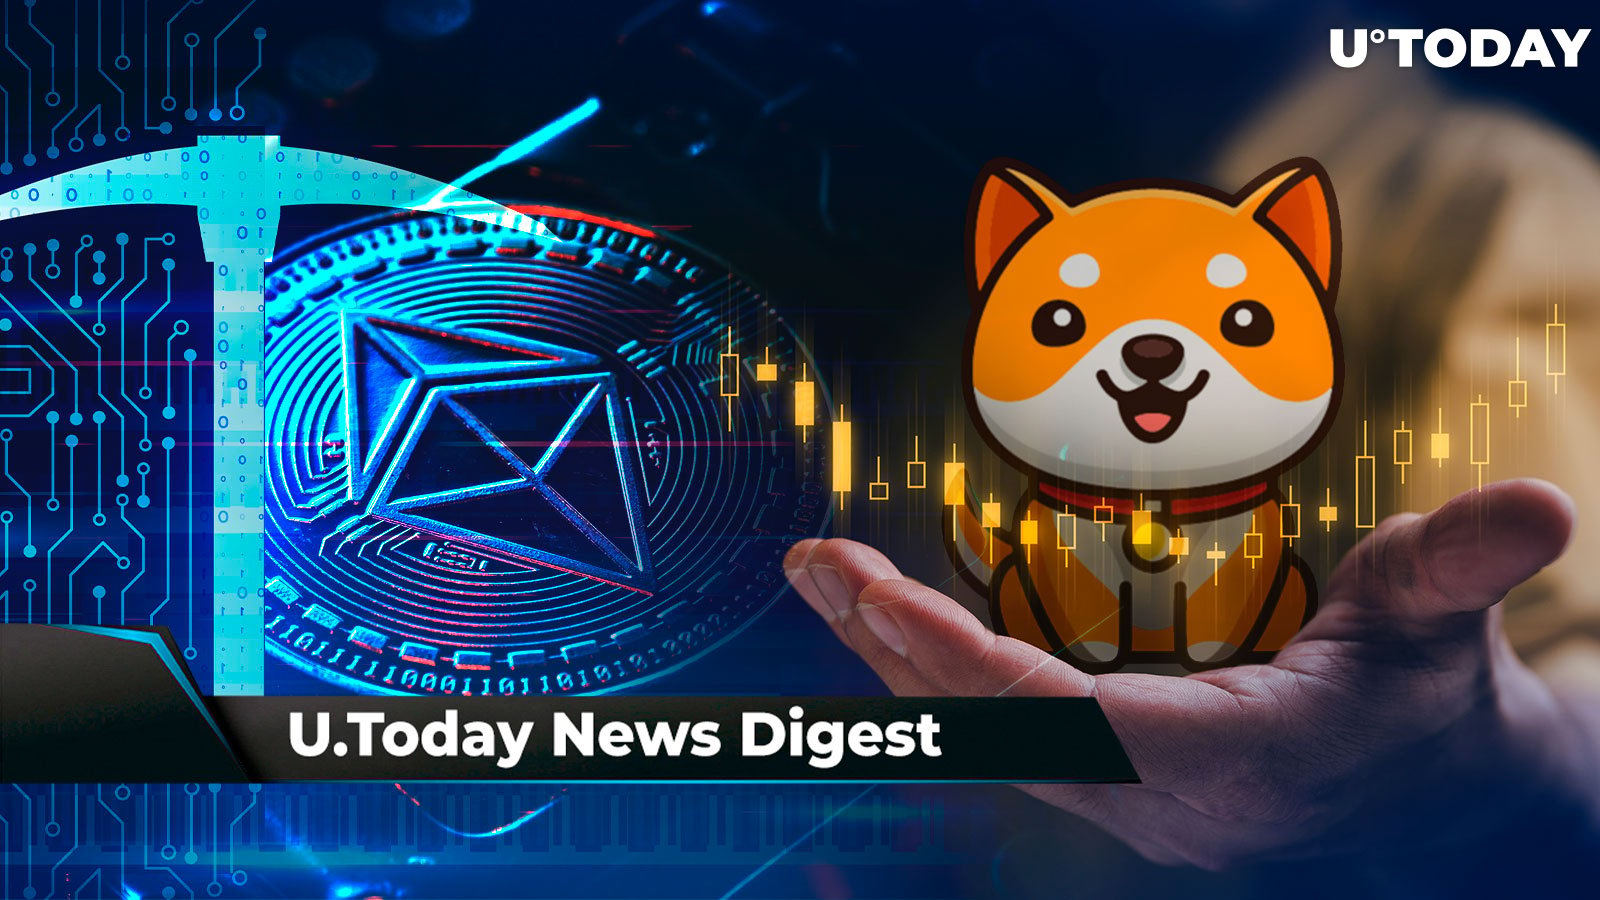 SHIB Reaches Dangerous Level, ETH Miners Surprise Vitalik Buterin, BabyDoge Holder Number Surpasses SHIB’s: Crypto News Digest by U.Today